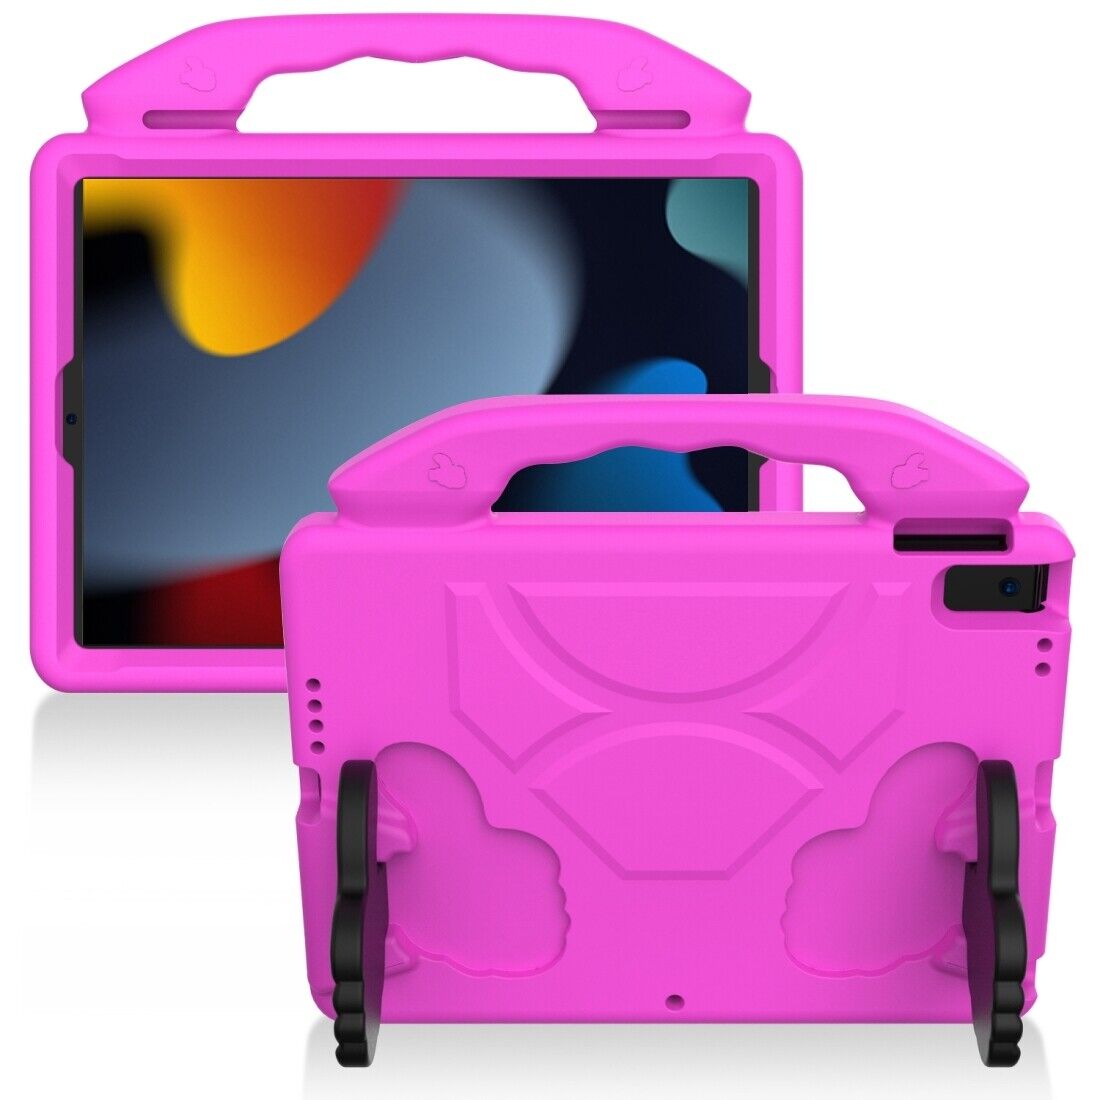 For Apple iPad 10.2 7th Gen 2019 Kids Friendly Case Shockproof Cover With Thumbs Up - Pink